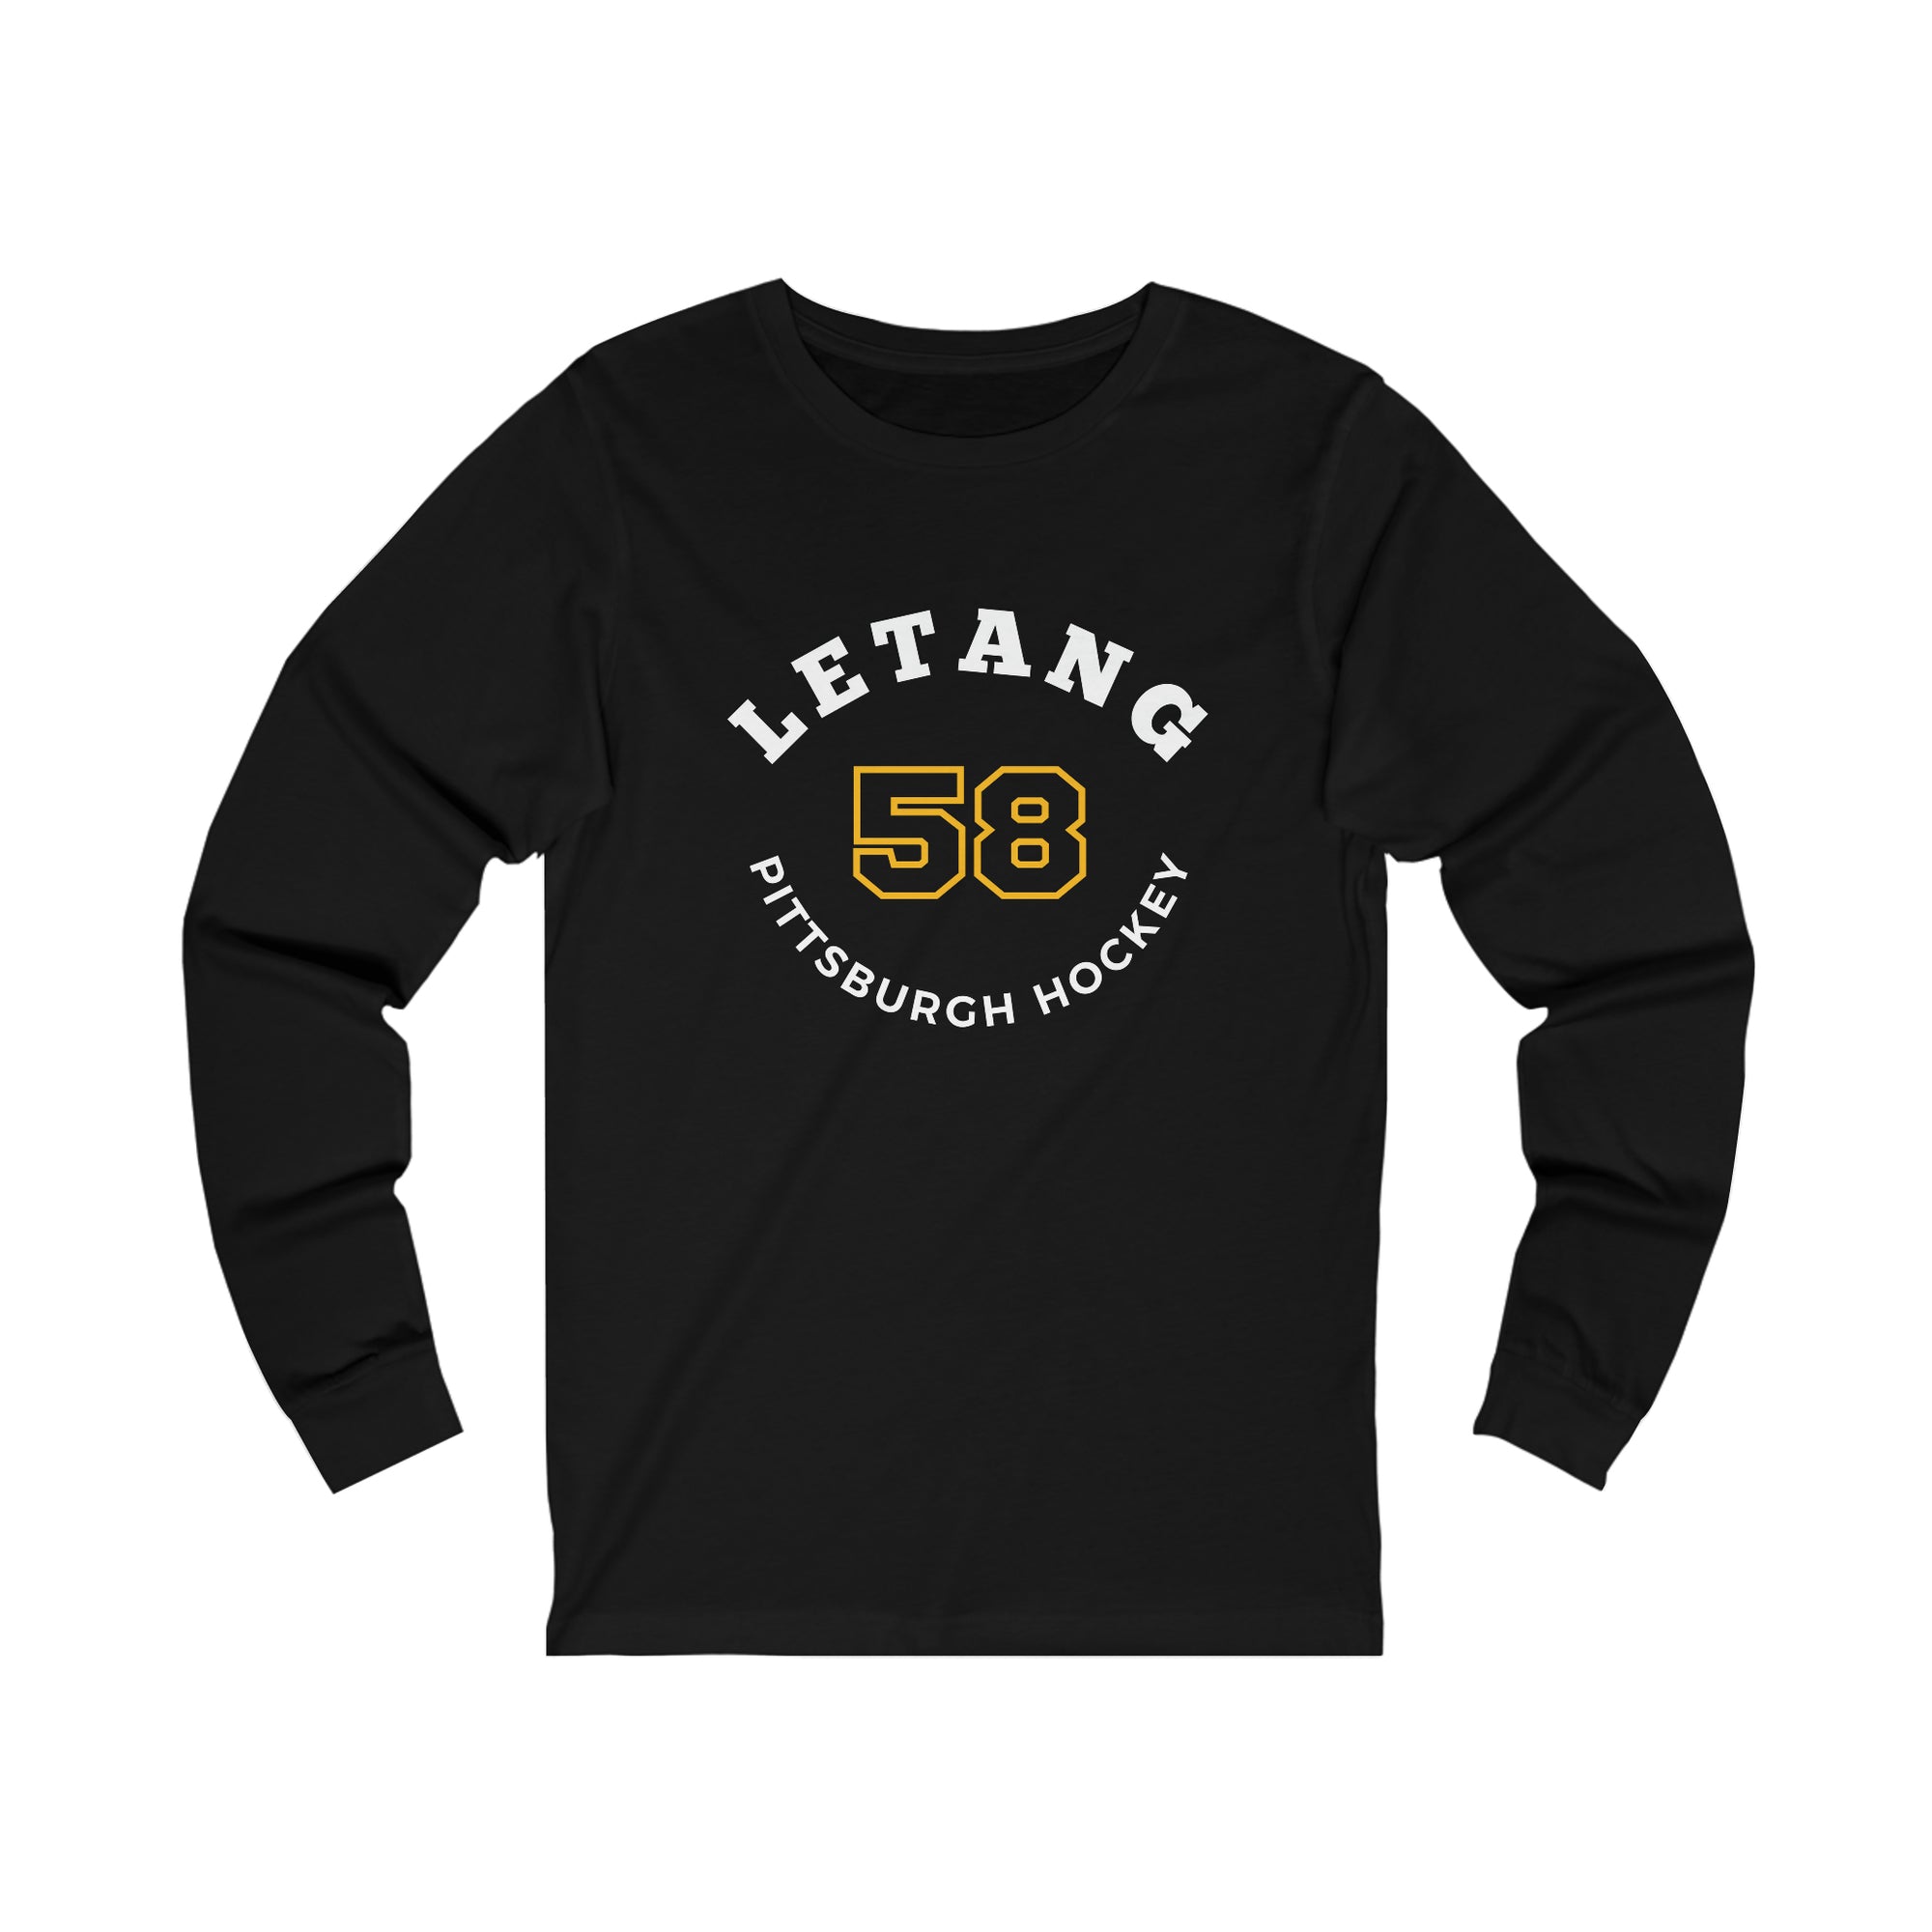 Letang 58 Pittsburgh Hockey Number Arch Design Unisex Jersey Long Sleeve Shirt